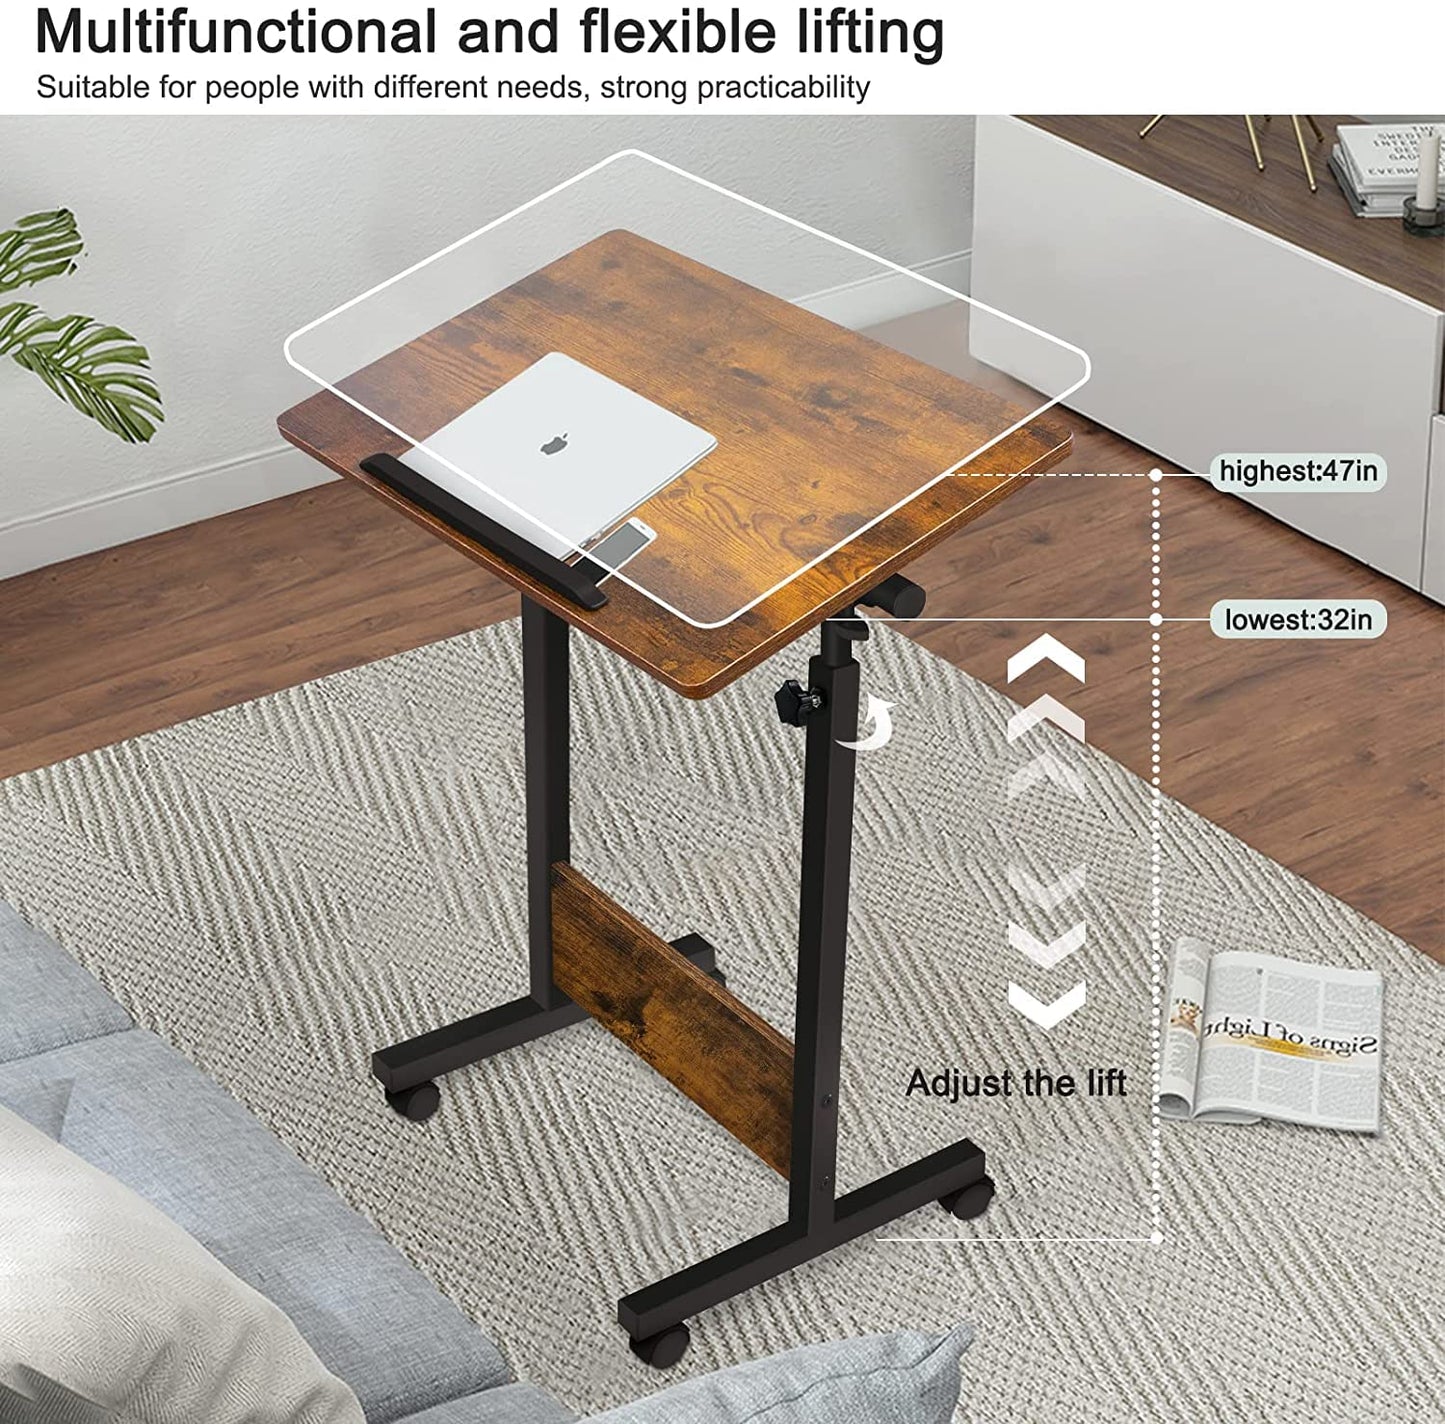 KOUPA Height Adjustable Mobile Standing Desk 16×24 in,360° Flip Desk Stand Desk Home Office Table Standing Desk for Small Space Offices,Easy to